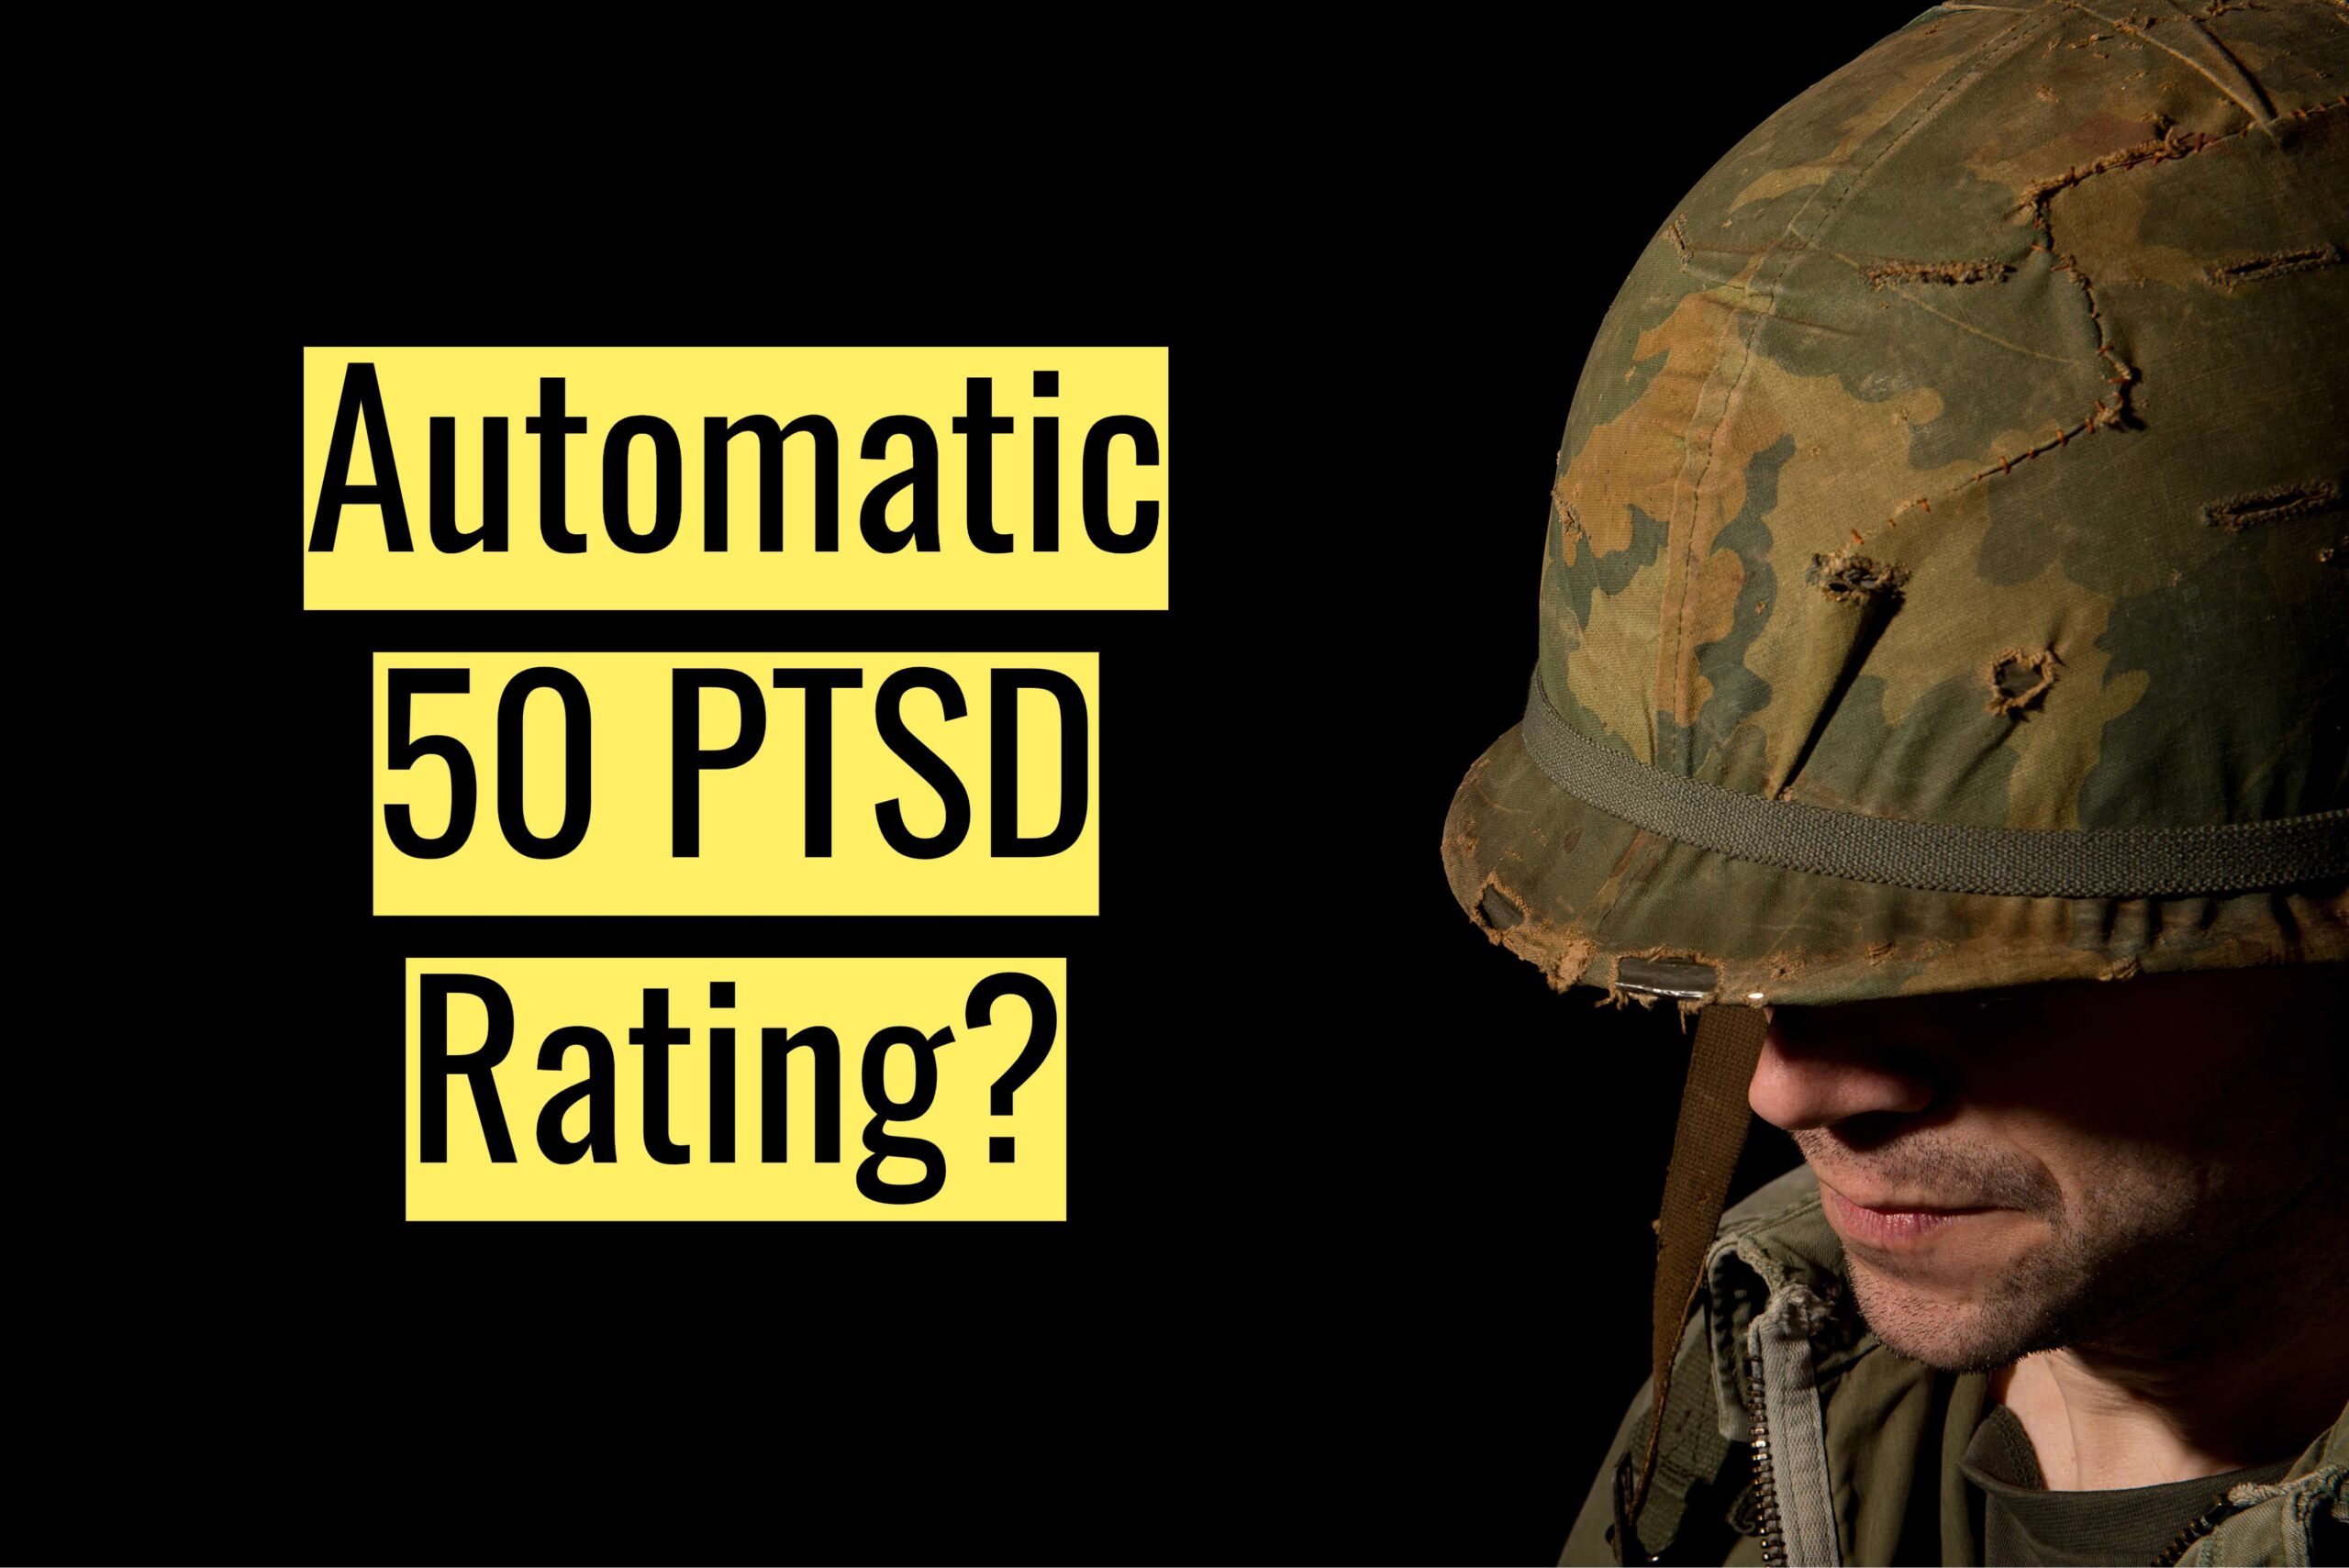 Automatic 50 PTSD Rating Explained Automatic 50 PTSD Rating